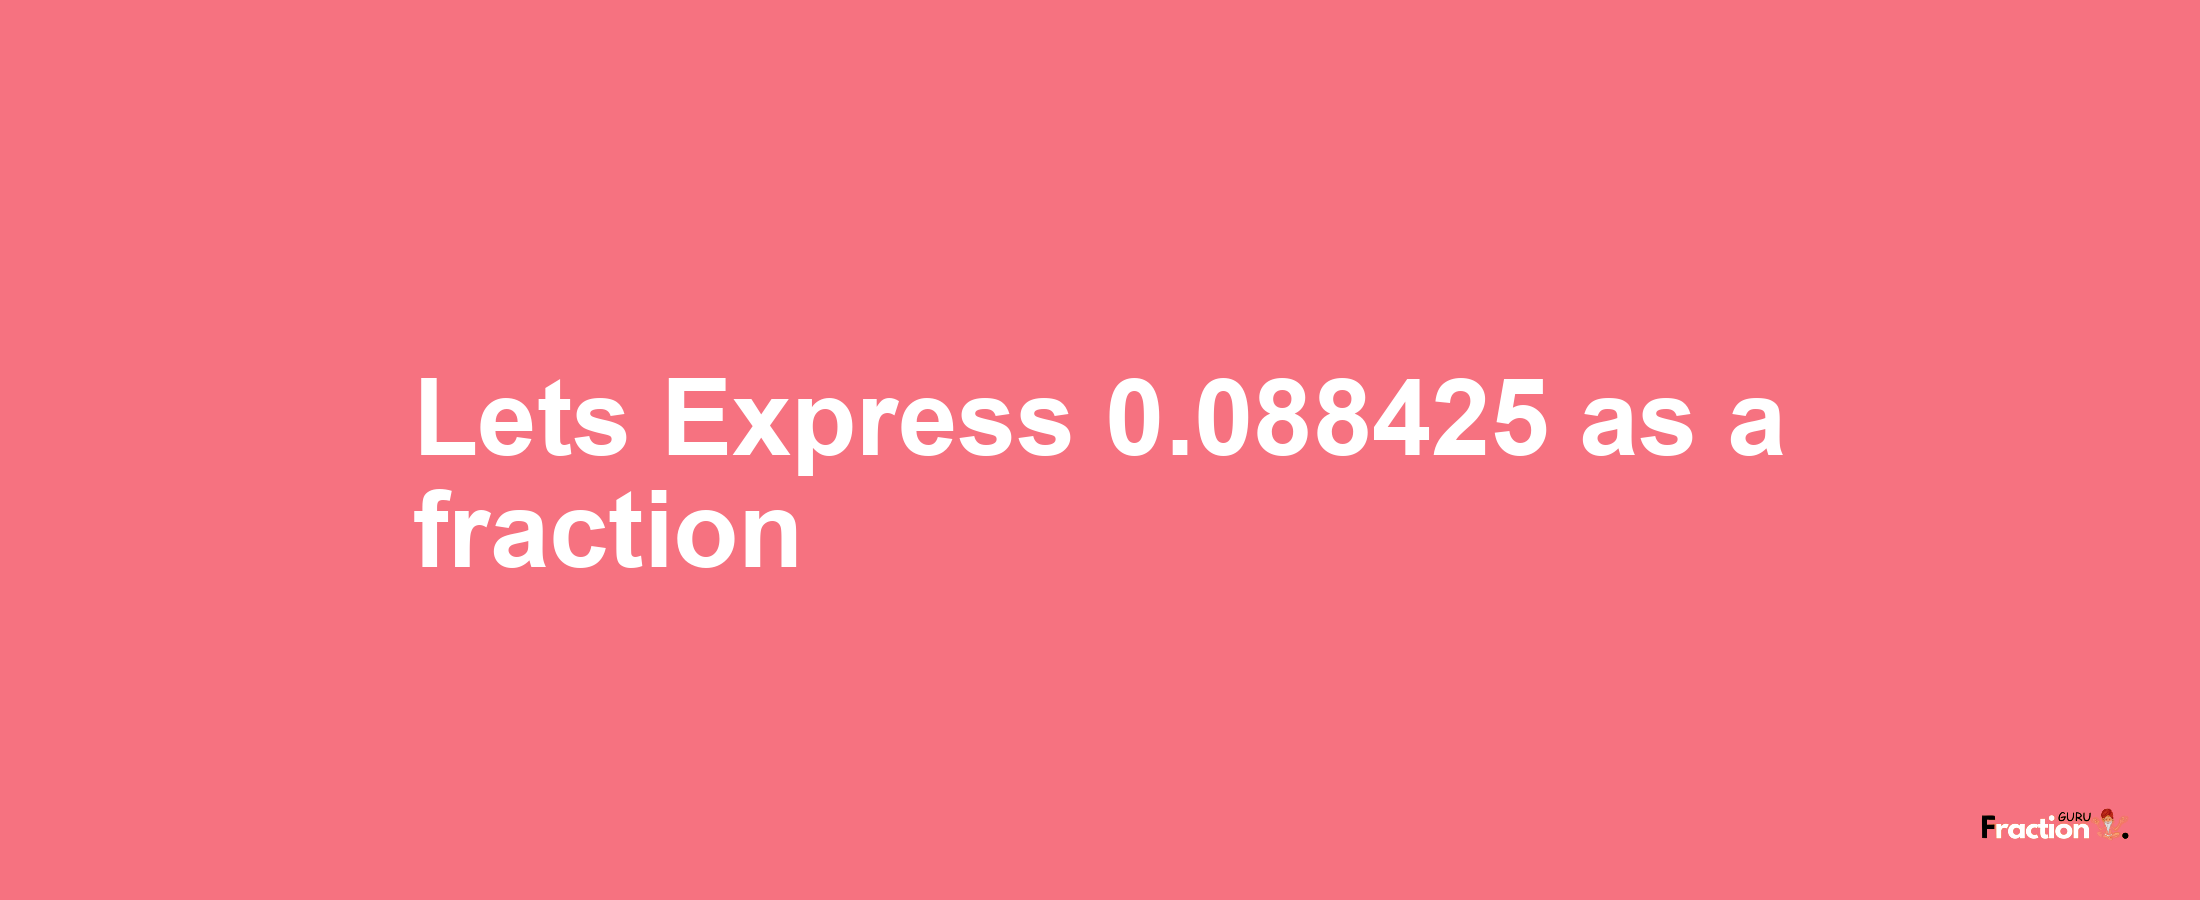 Lets Express 0.088425 as afraction